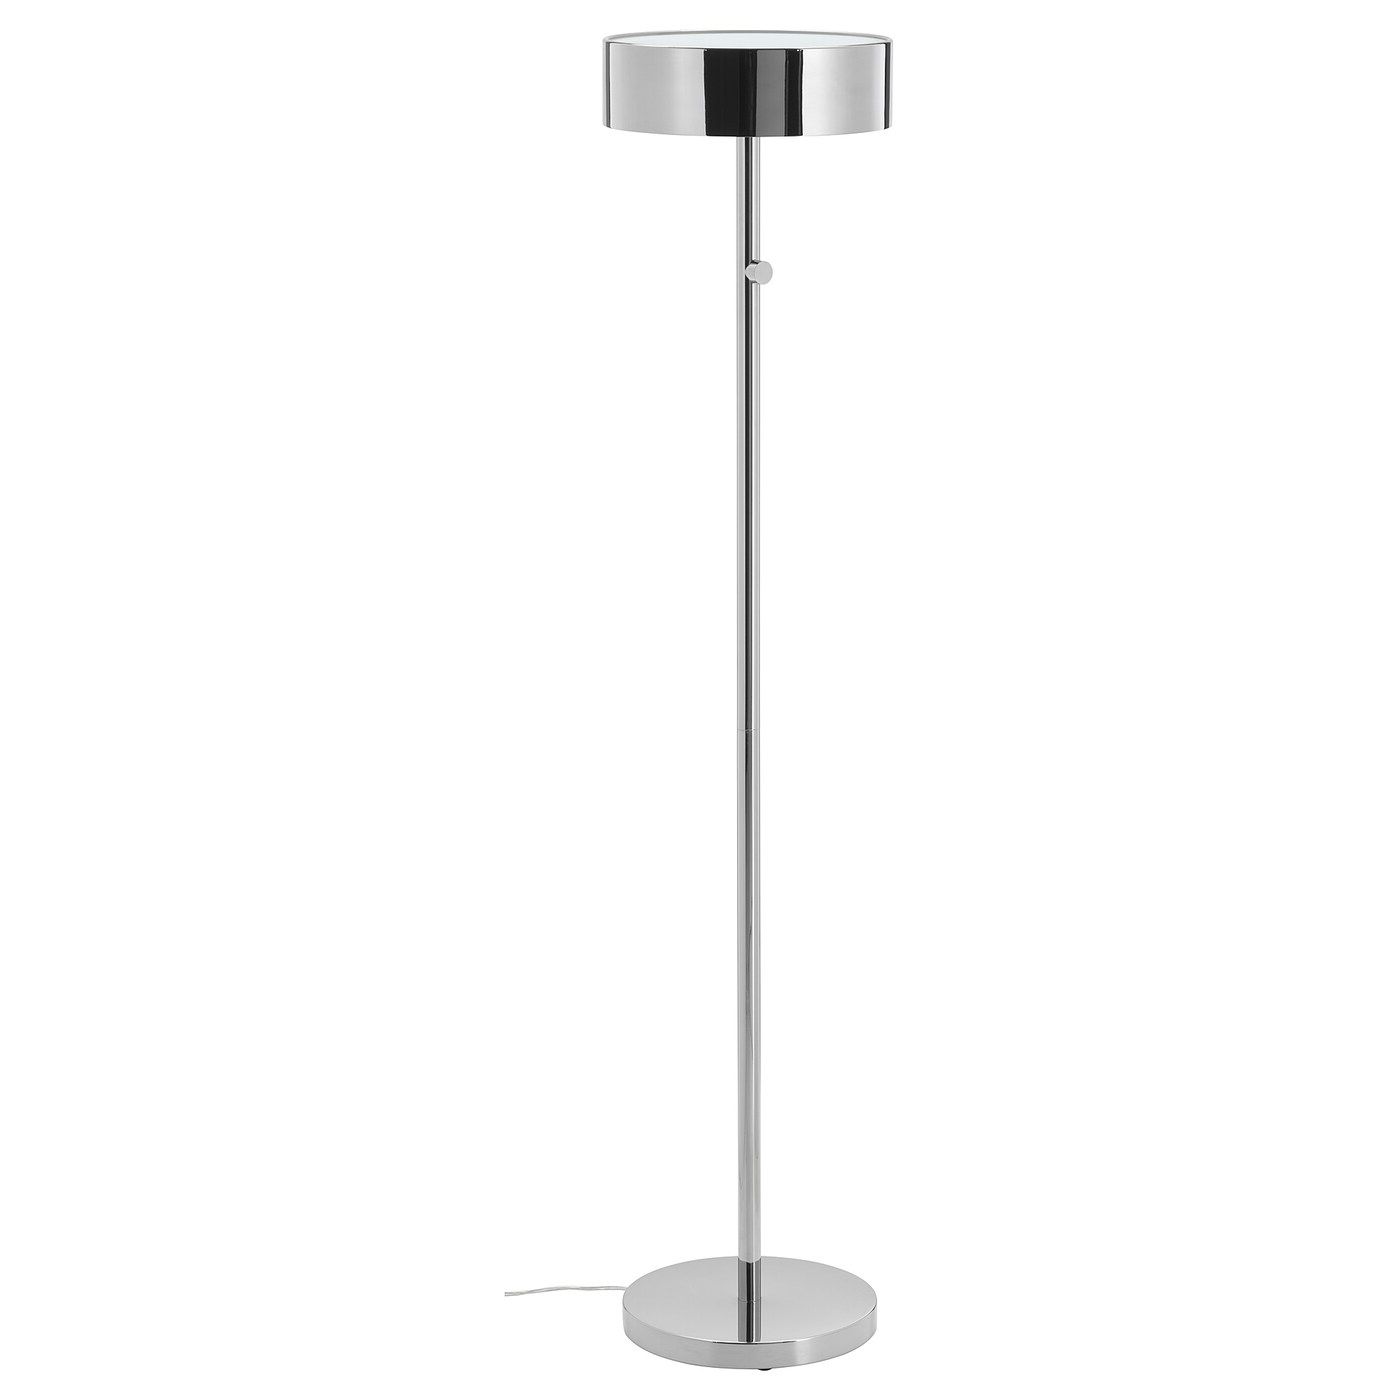 Best And Newest Chrome Finish Metal Standing Lamps Intended For Stockholm 2017 Chrome Plated, Floor Lamp – Ikea (View 12 of 15)